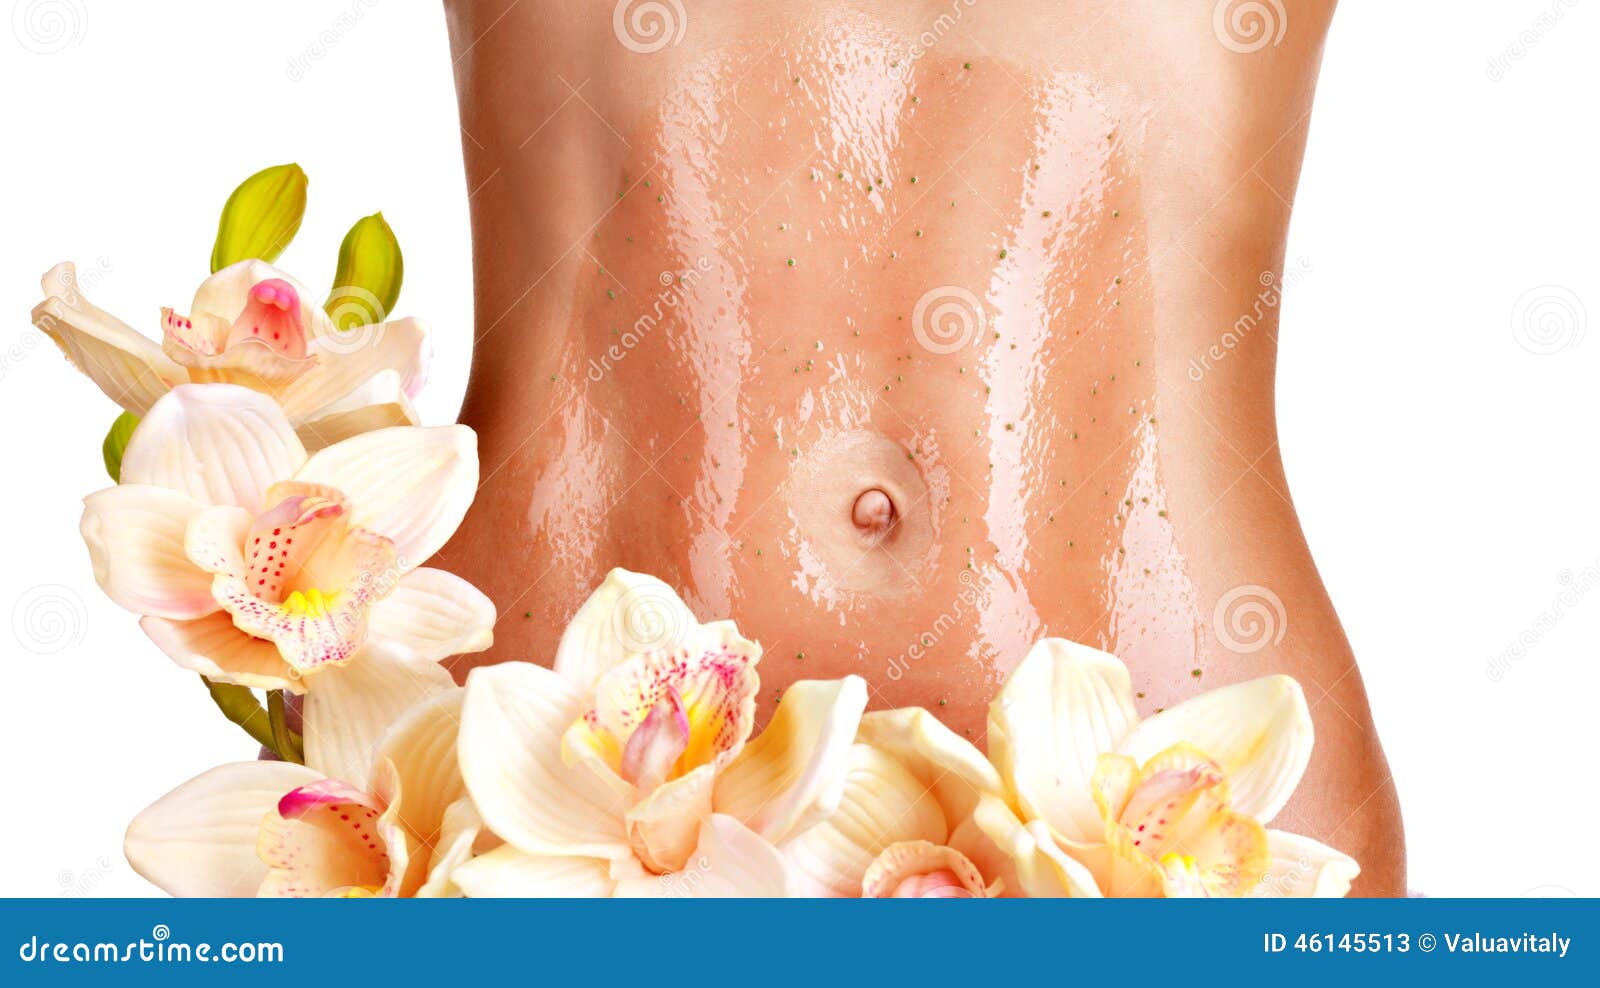 Beautiful body with scrub on a white background with a flower